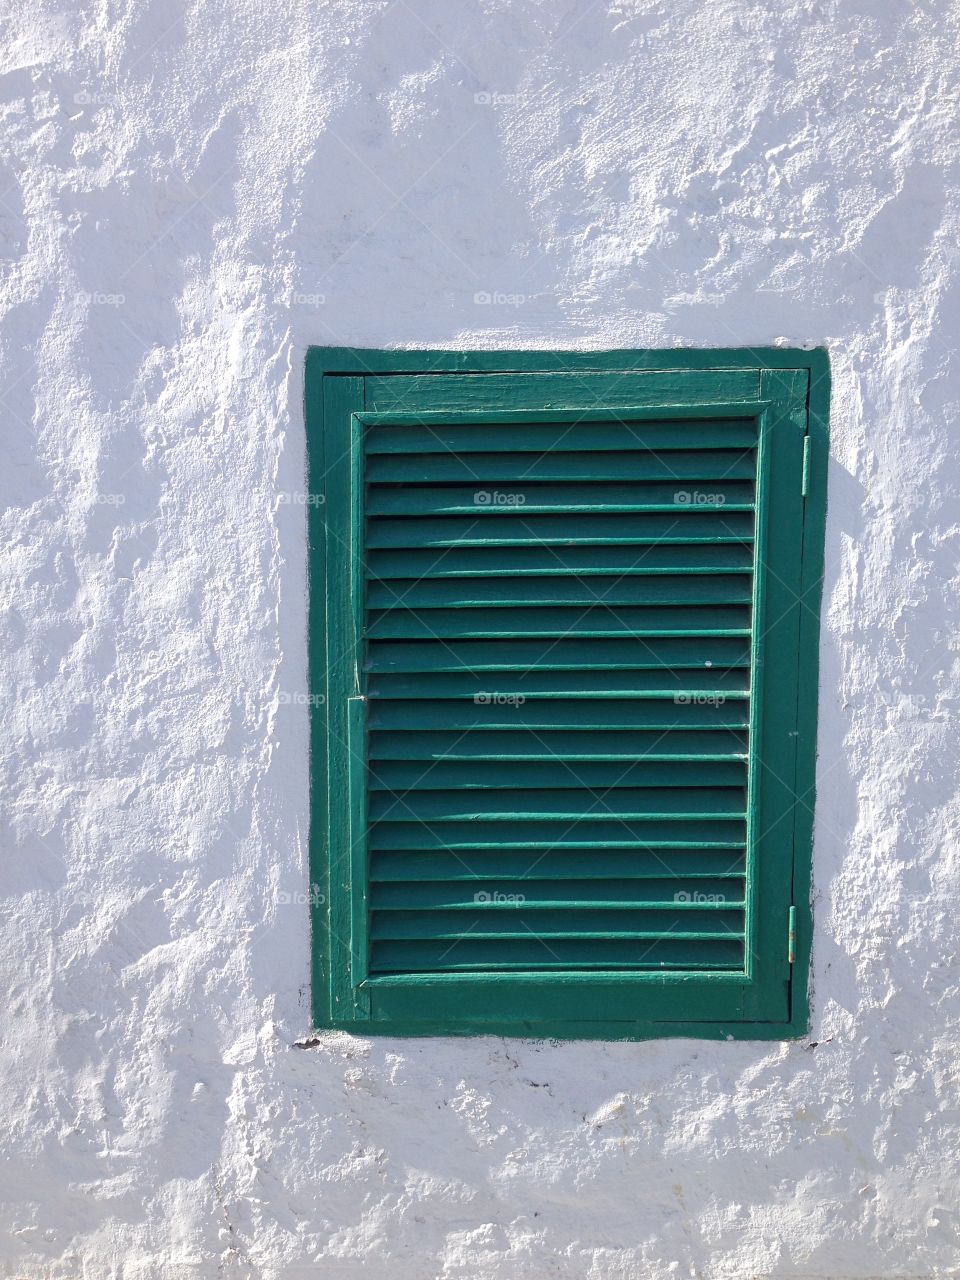 View of a window